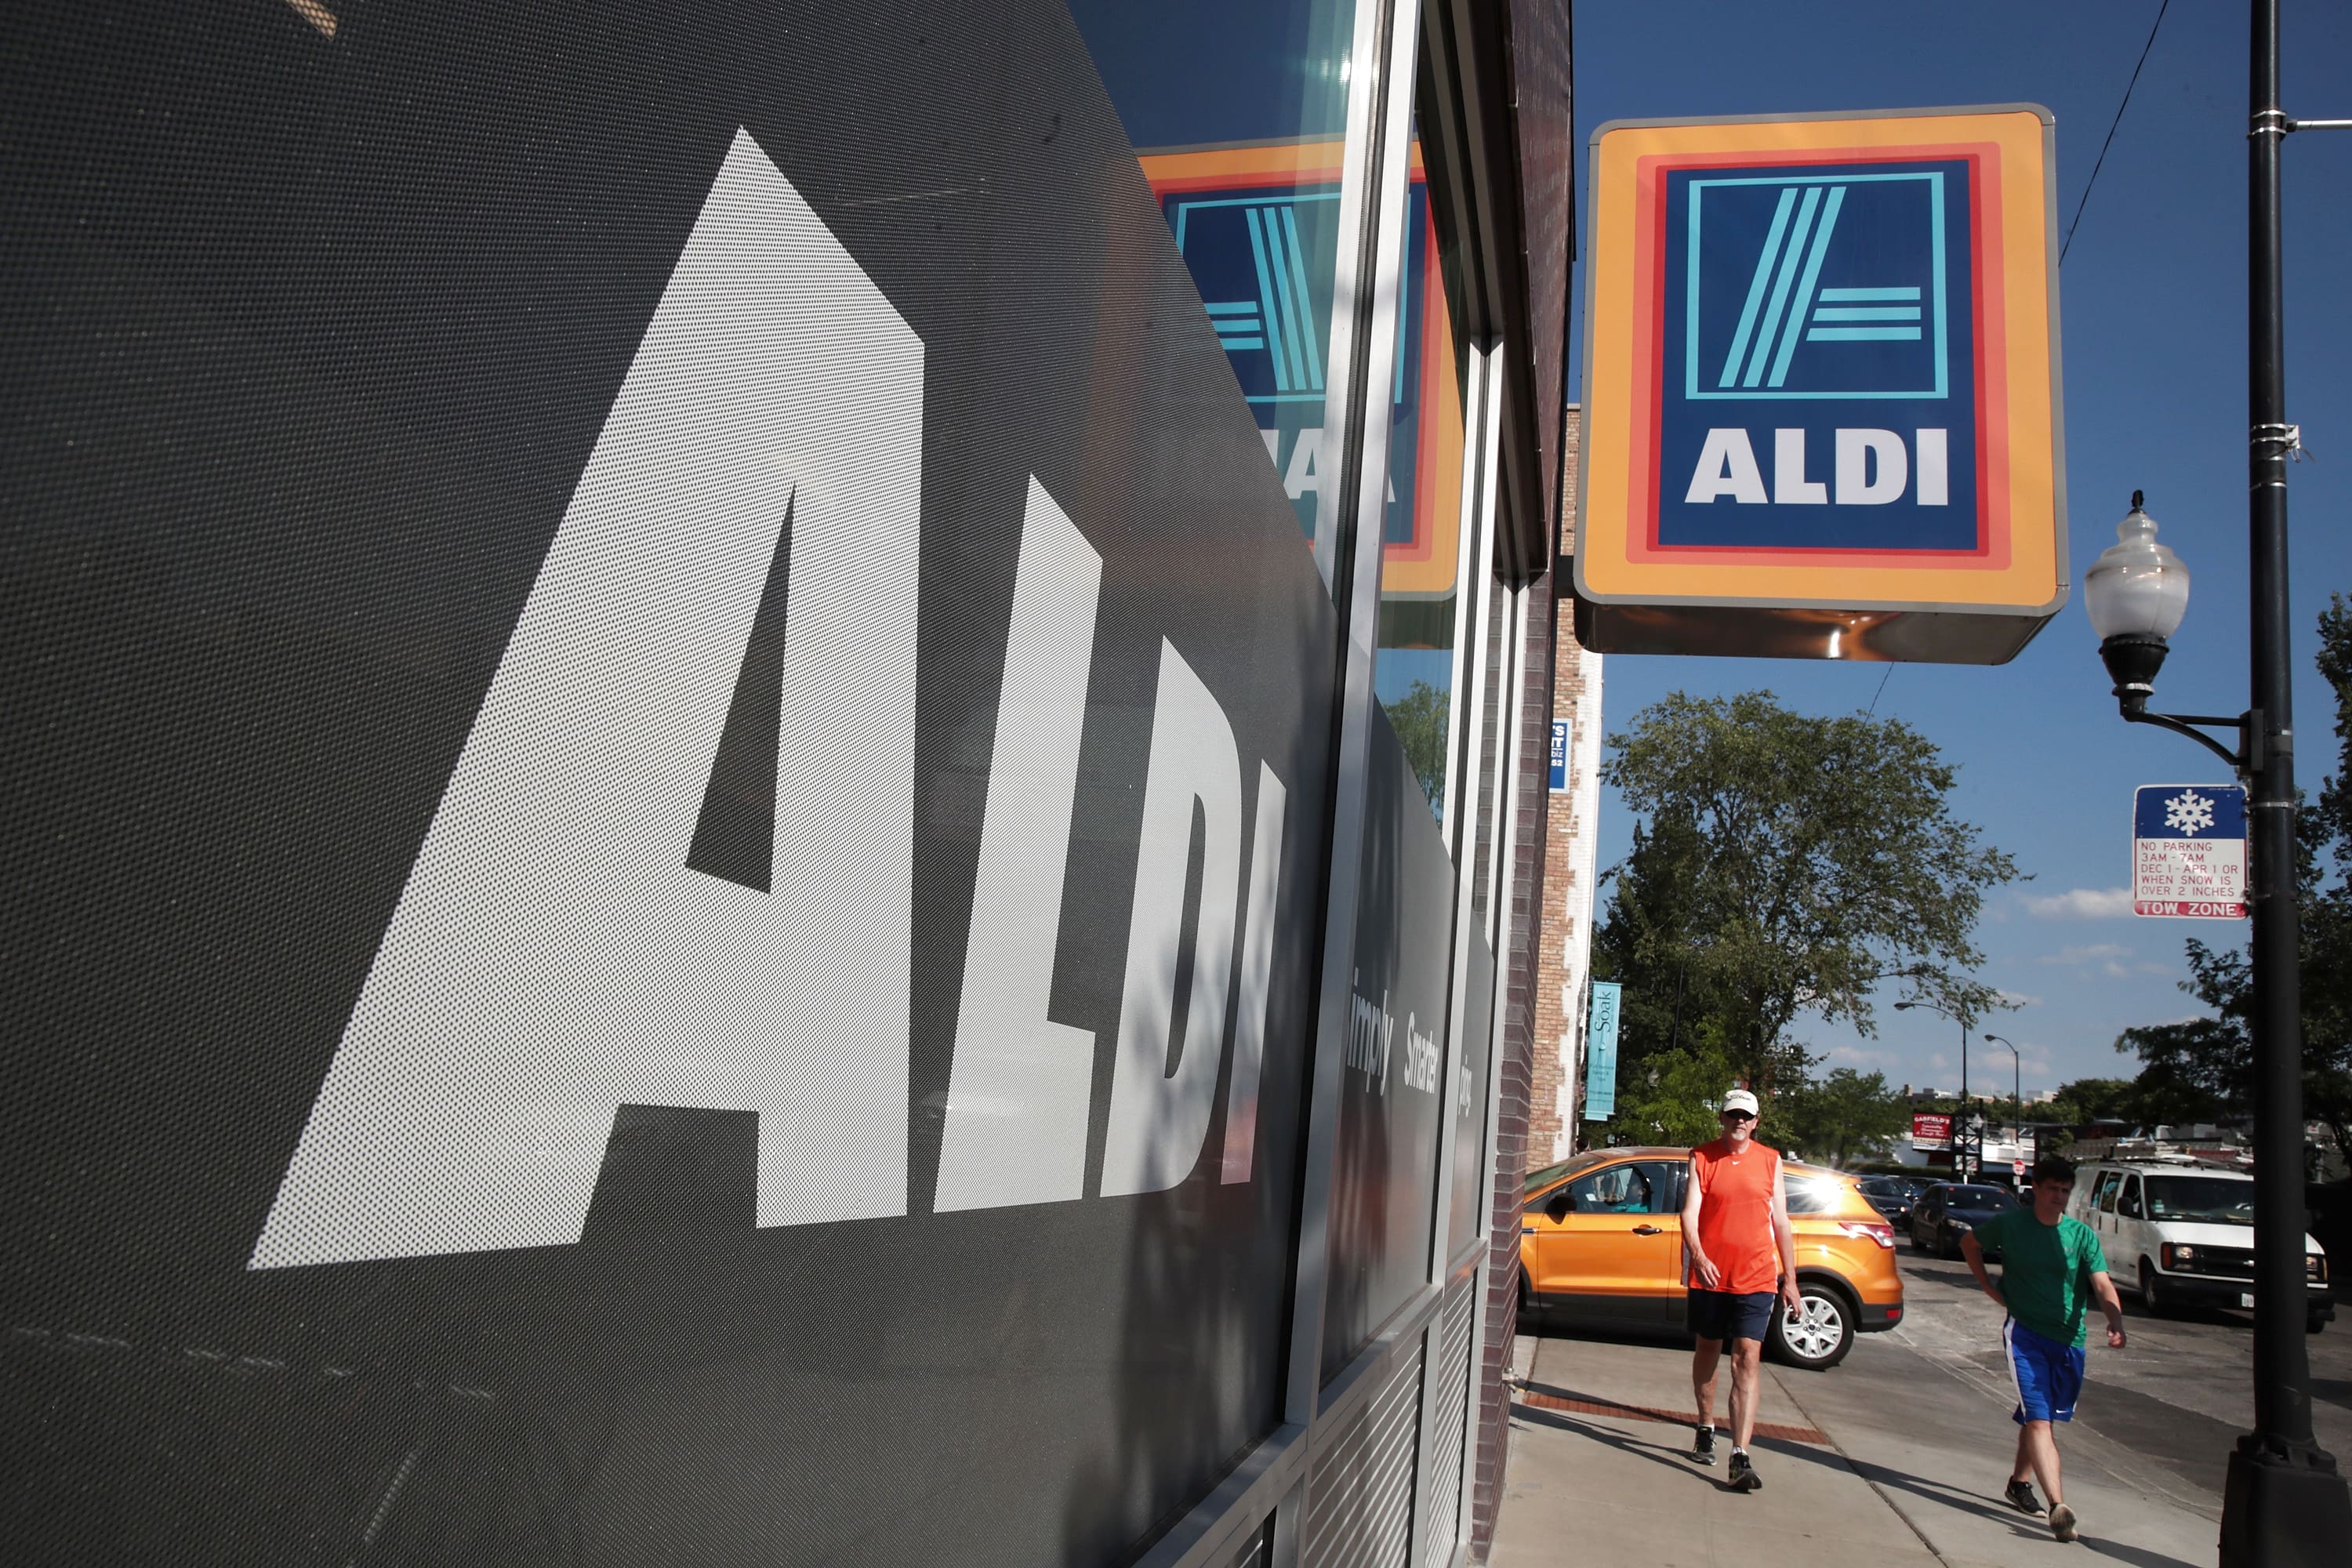 Aldi plans to add 100 new stores in the U.S. and expand sidewalk withdrawal